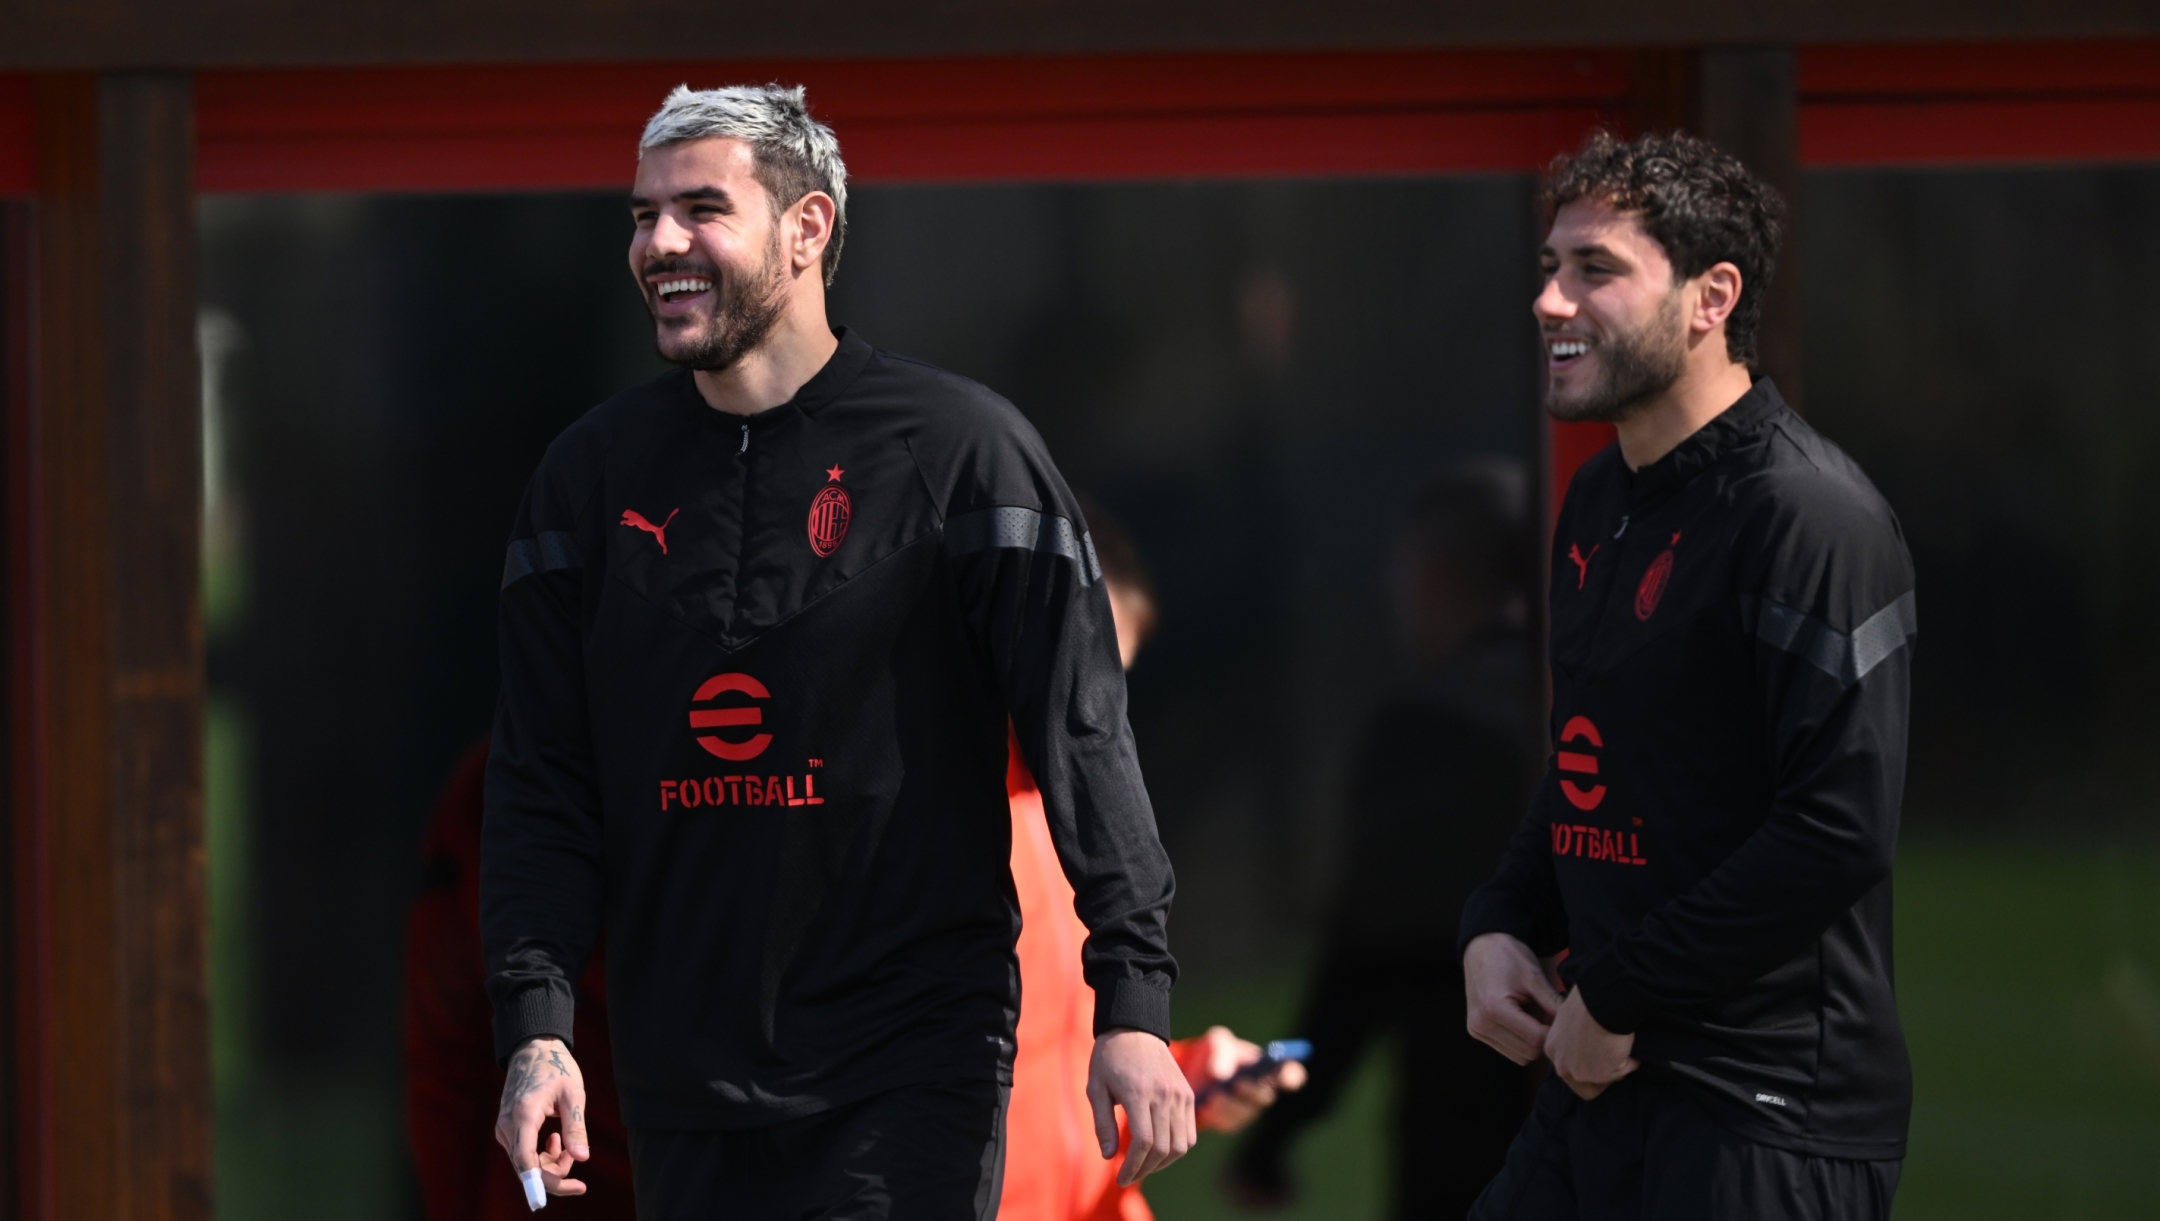 CAIRATE, ITALY - APRIL 05: Theo Hernandez and Davide Calabria of AC Milan smile during AC Milan training session at Milanello on April 05, 2023 in Cairate, Italy. (Photo by Claudio Villa/AC Milan via Getty Images)